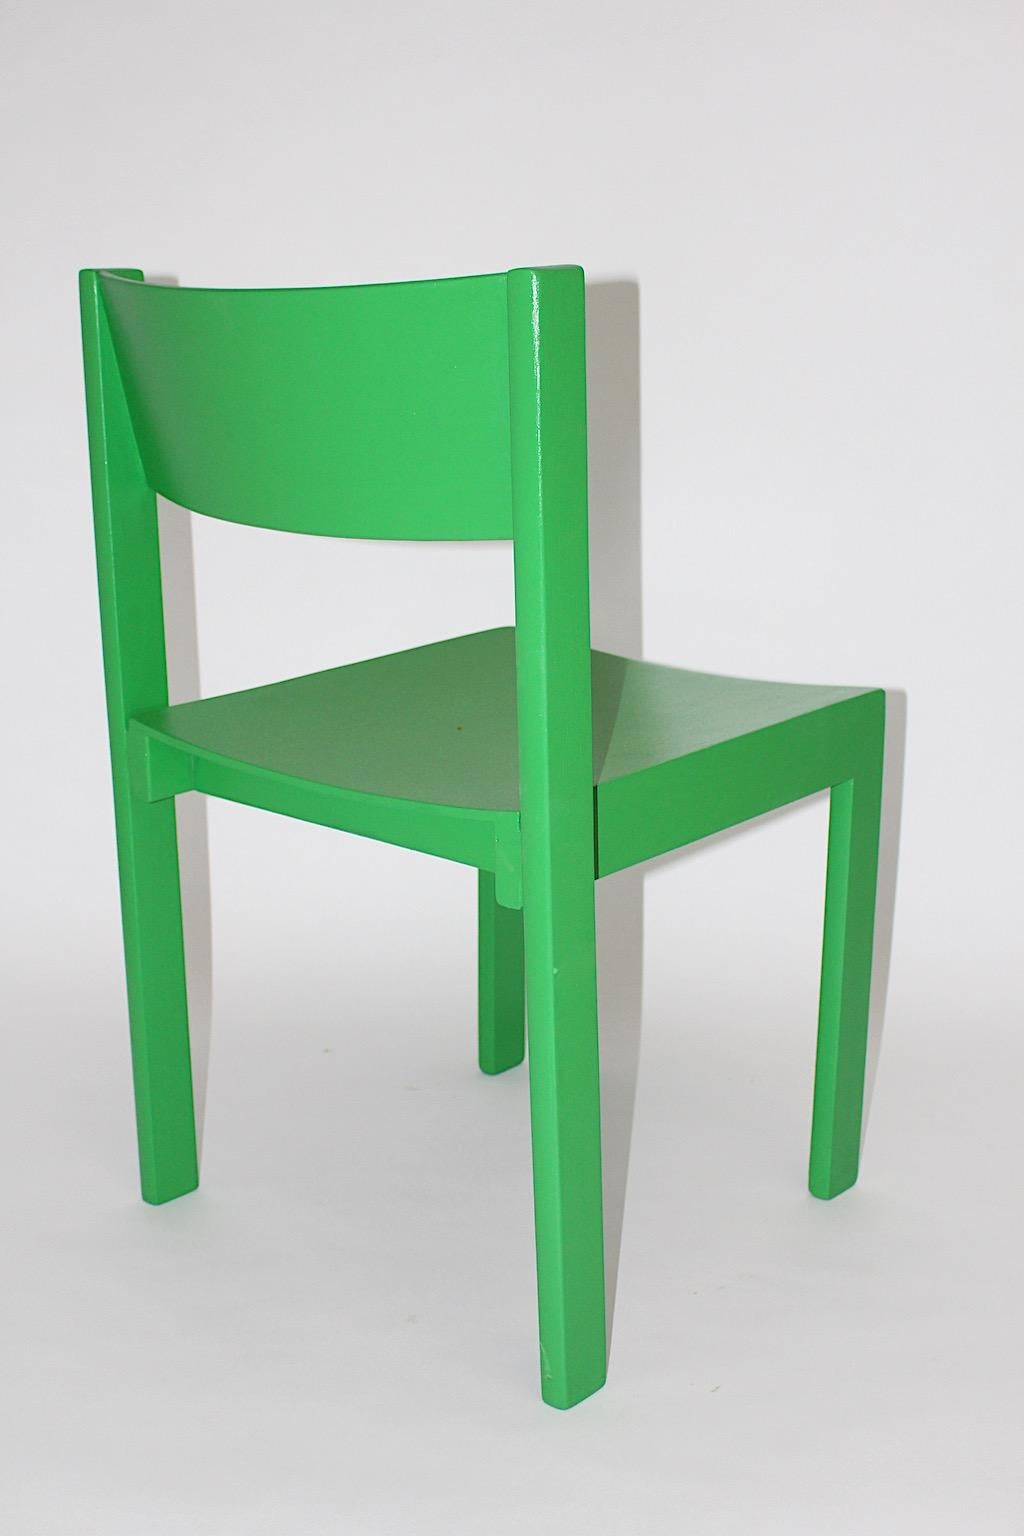 Modernist Green Vintage Beech Stackable Dining Chairs 1950s Austria For Sale 4